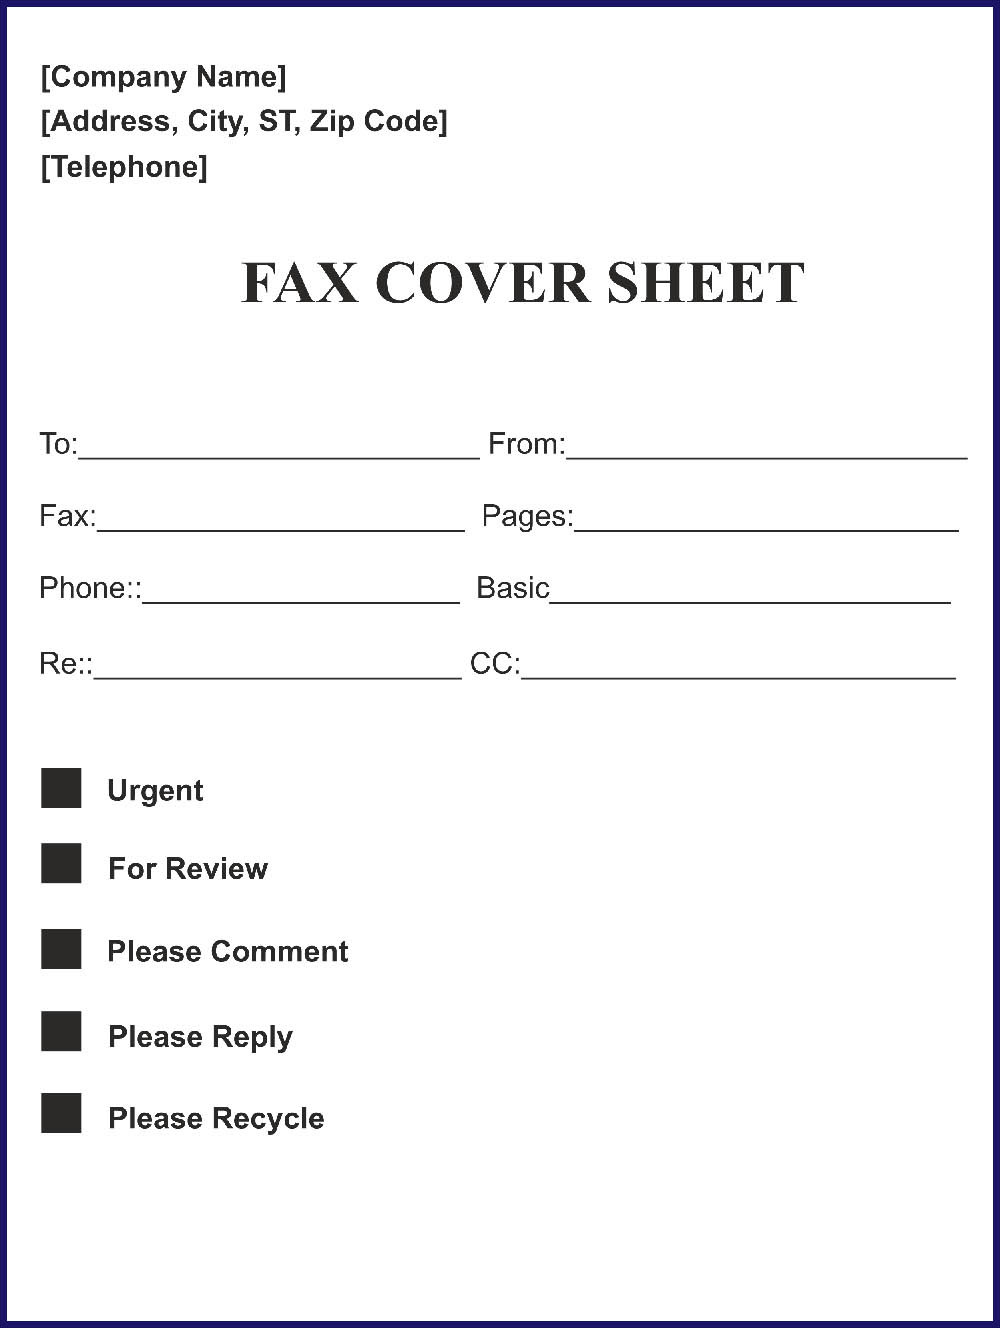 professional fax cover sheet